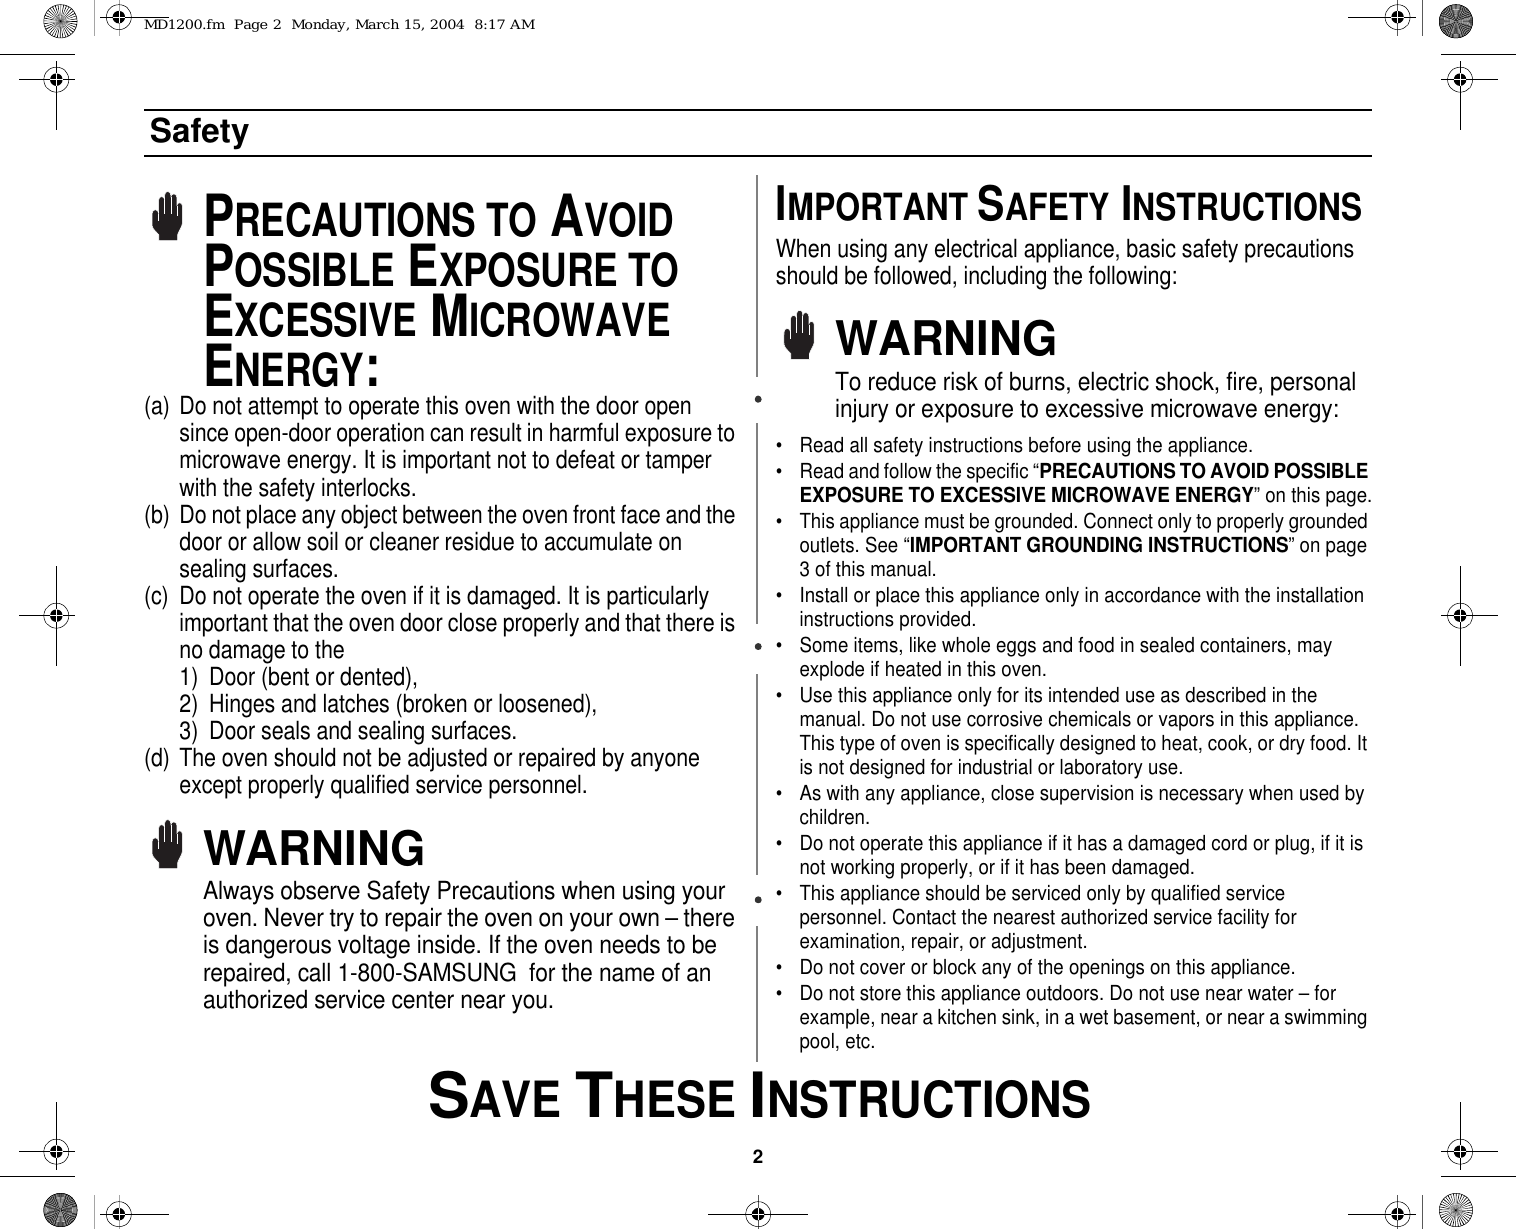 2 SAVE THESE INSTRUCTIONSSafetyPRECAUTIONS TO AVOID POSSIBLE EXPOSURE TO EXCESSIVE MICROWAVE ENERGY:(a) Do not attempt to operate this oven with the door open since open-door operation can result in harmful exposure to microwave energy. It is important not to defeat or tamper with the safety interlocks.(b) Do not place any object between the oven front face and the door or allow soil or cleaner residue to accumulate on sealing surfaces.(c) Do not operate the oven if it is damaged. It is particularly important that the oven door close properly and that there is no damage to the 1) Door (bent or dented), 2) Hinges and latches (broken or loosened), 3) Door seals and sealing surfaces.(d) The oven should not be adjusted or repaired by anyone except properly qualified service personnel.WARNINGAlways observe Safety Precautions when using your oven. Never try to repair the oven on your own – there is dangerous voltage inside. If the oven needs to be repaired, call 1-800-SAMSUNG  for the name of an authorized service center near you.IMPORTANT SAFETY INSTRUCTIONSWhen using any electrical appliance, basic safety precautions should be followed, including the following:WARNINGTo reduce risk of burns, electric shock, fire, personal injury or exposure to excessive microwave energy:• Read all safety instructions before using the appliance.• Read and follow the specific “PRECAUTIONS TO AVOID POSSIBLE EXPOSURE TO EXCESSIVE MICROWAVE ENERGY” on this page.• This appliance must be grounded. Connect only to properly grounded outlets. See “IMPORTANT GROUNDING INSTRUCTIONS” on page 3 of this manual. • Install or place this appliance only in accordance with the installation instructions provided.• Some items, like whole eggs and food in sealed containers, may explode if heated in this oven.• Use this appliance only for its intended use as described in the manual. Do not use corrosive chemicals or vapors in this appliance. This type of oven is specifically designed to heat, cook, or dry food. It is not designed for industrial or laboratory use.• As with any appliance, close supervision is necessary when used by children.• Do not operate this appliance if it has a damaged cord or plug, if it is not working properly, or if it has been damaged.• This appliance should be serviced only by qualified service personnel. Contact the nearest authorized service facility for examination, repair, or adjustment.• Do not cover or block any of the openings on this appliance.• Do not store this appliance outdoors. Do not use near water – for example, near a kitchen sink, in a wet basement, or near a swimming pool, etc. MD1200.fm  Page 2  Monday, March 15, 2004  8:17 AM